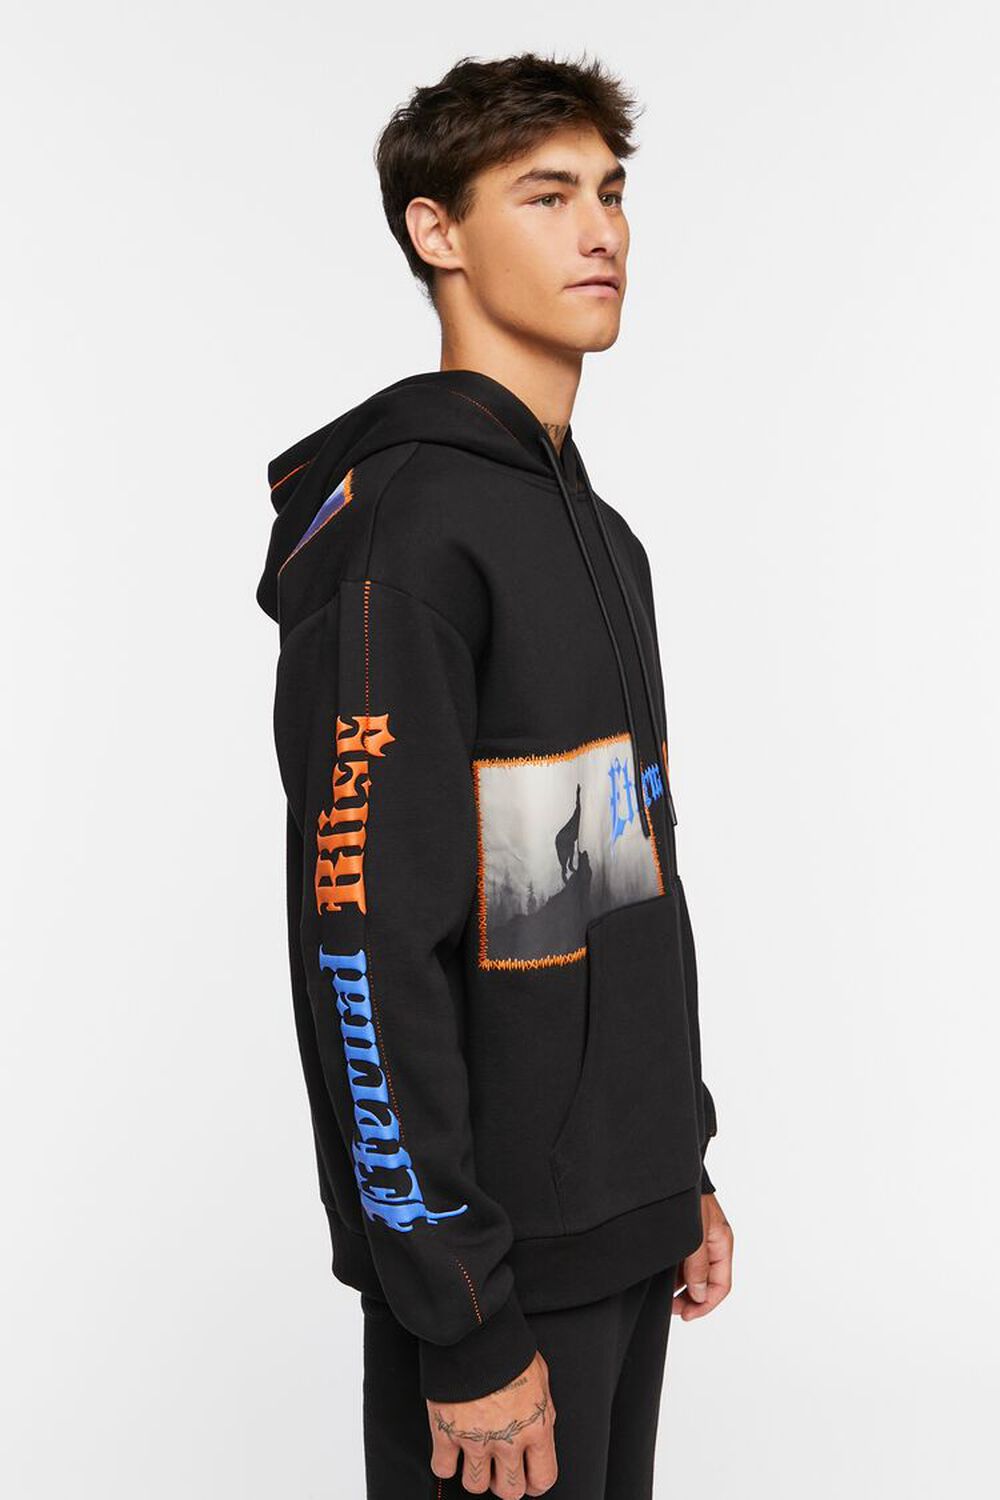 Eternal Bliss Howling Wolf Graphic Hoodie – Urban Planet